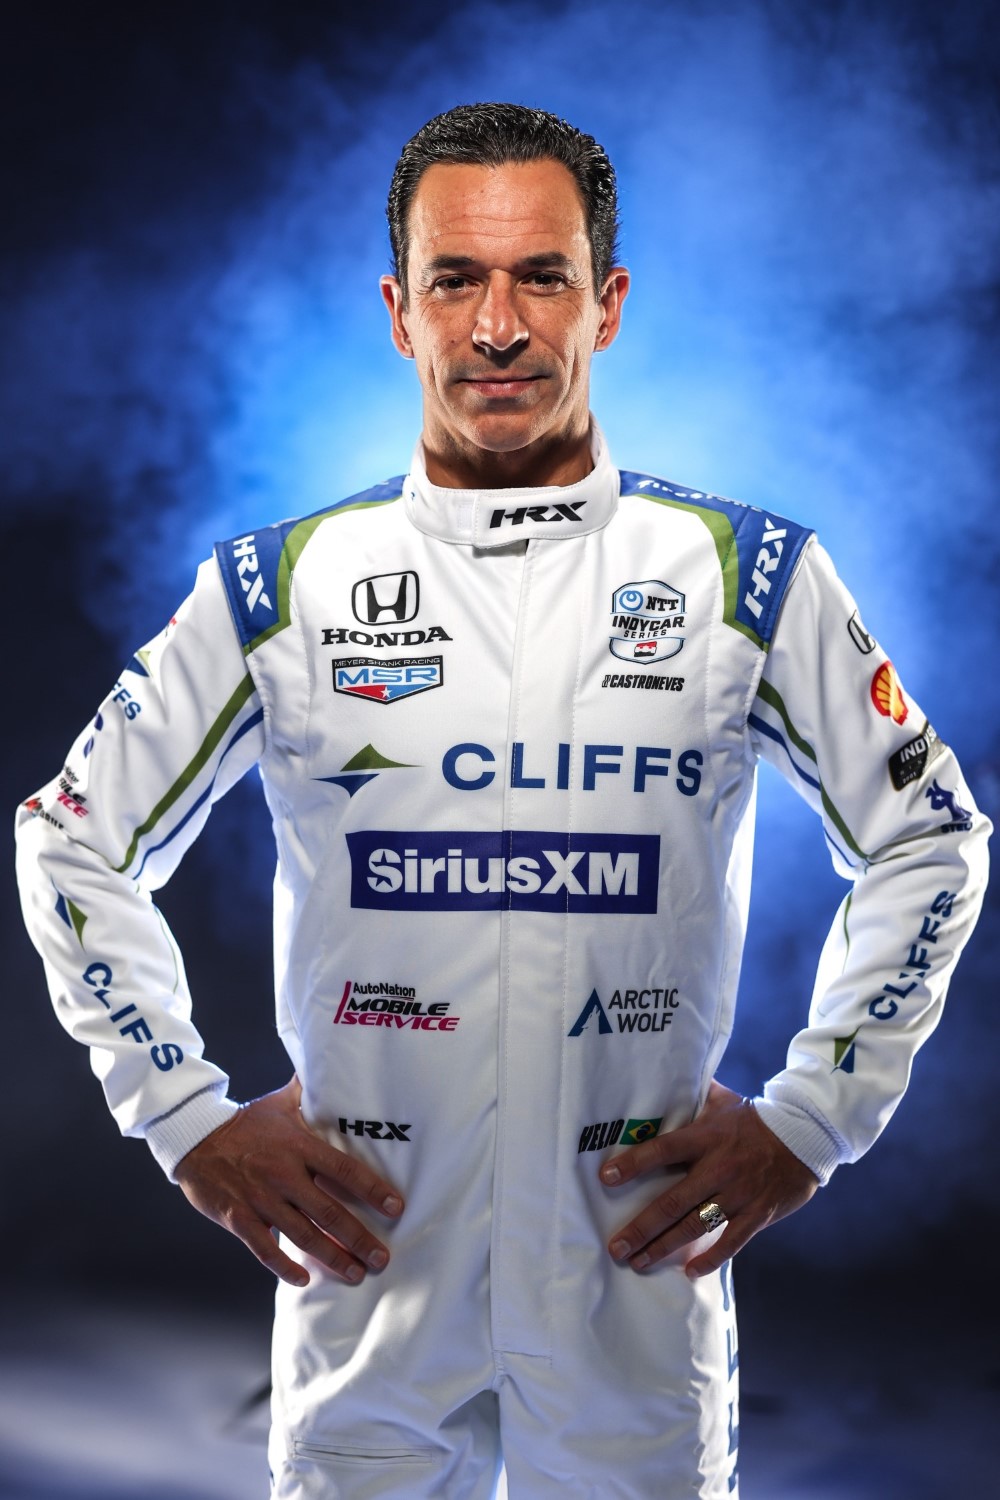 Cleveland-Cliffs Joins Helio Castroneves’ Indianapolis 500 Drive for 5